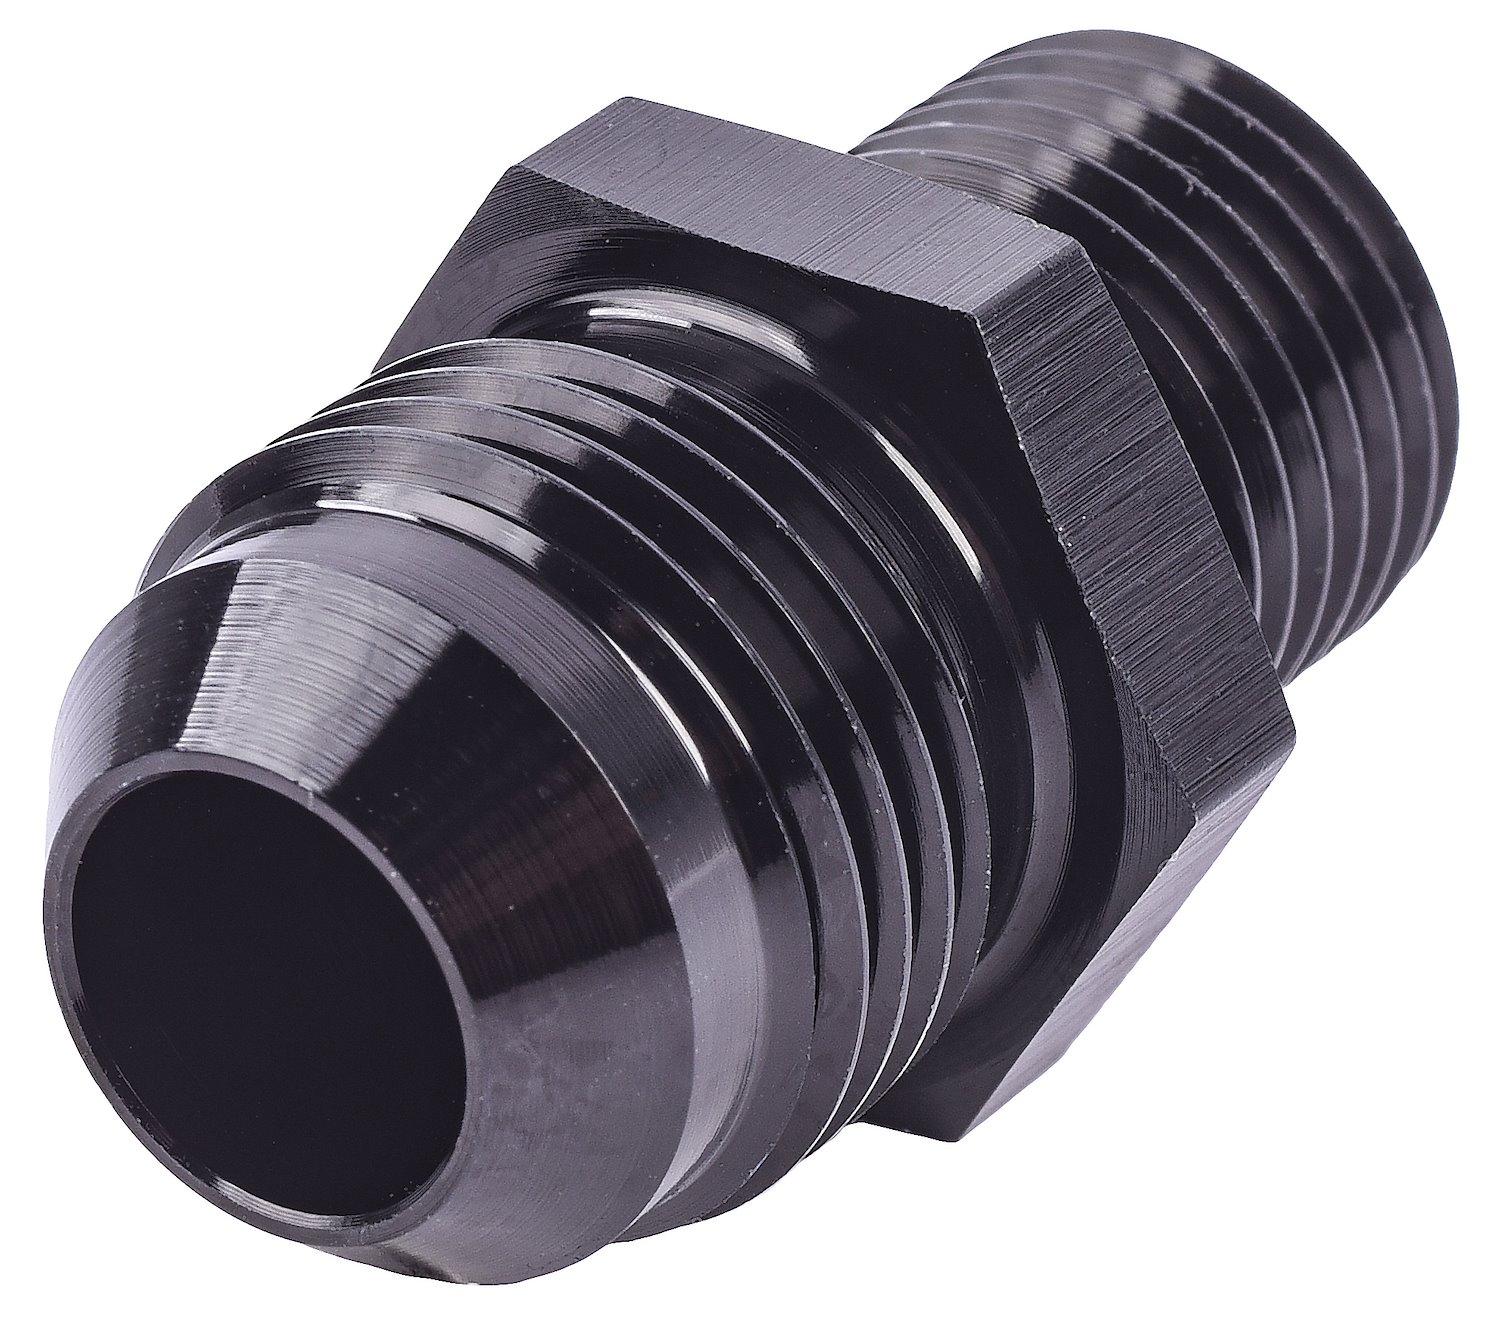 AN to Metric Adapter Fitting [-8 AN Male to 16mm x 1.5 Male]